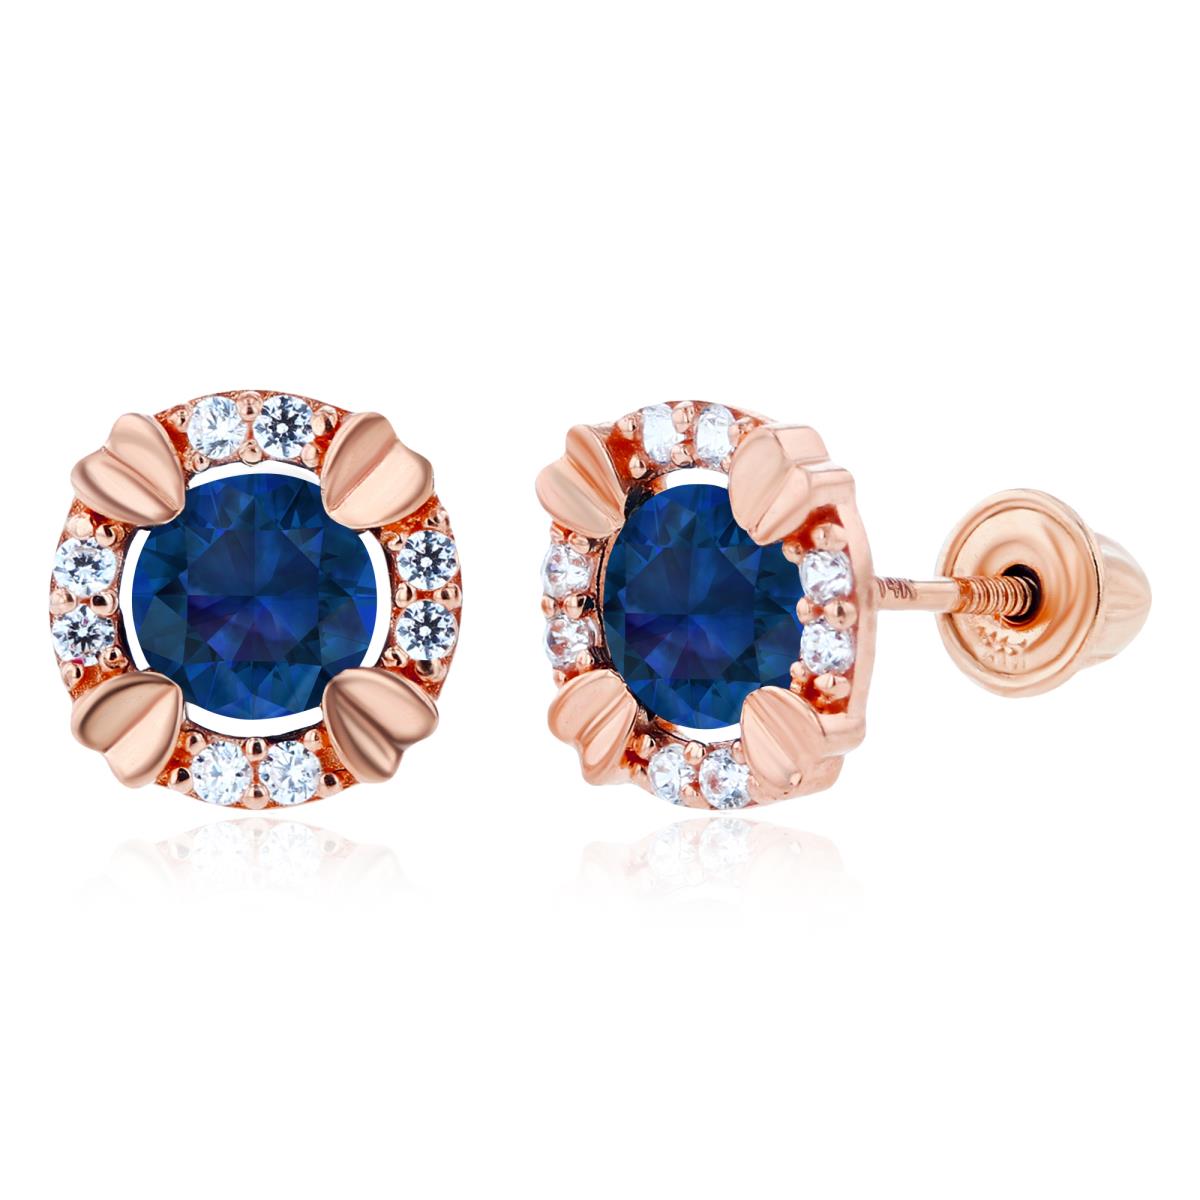 14K Rose Gold 4mm Round Created Blue Sapphire & 1mm Created White Sapphire Halo Screwback Earrings